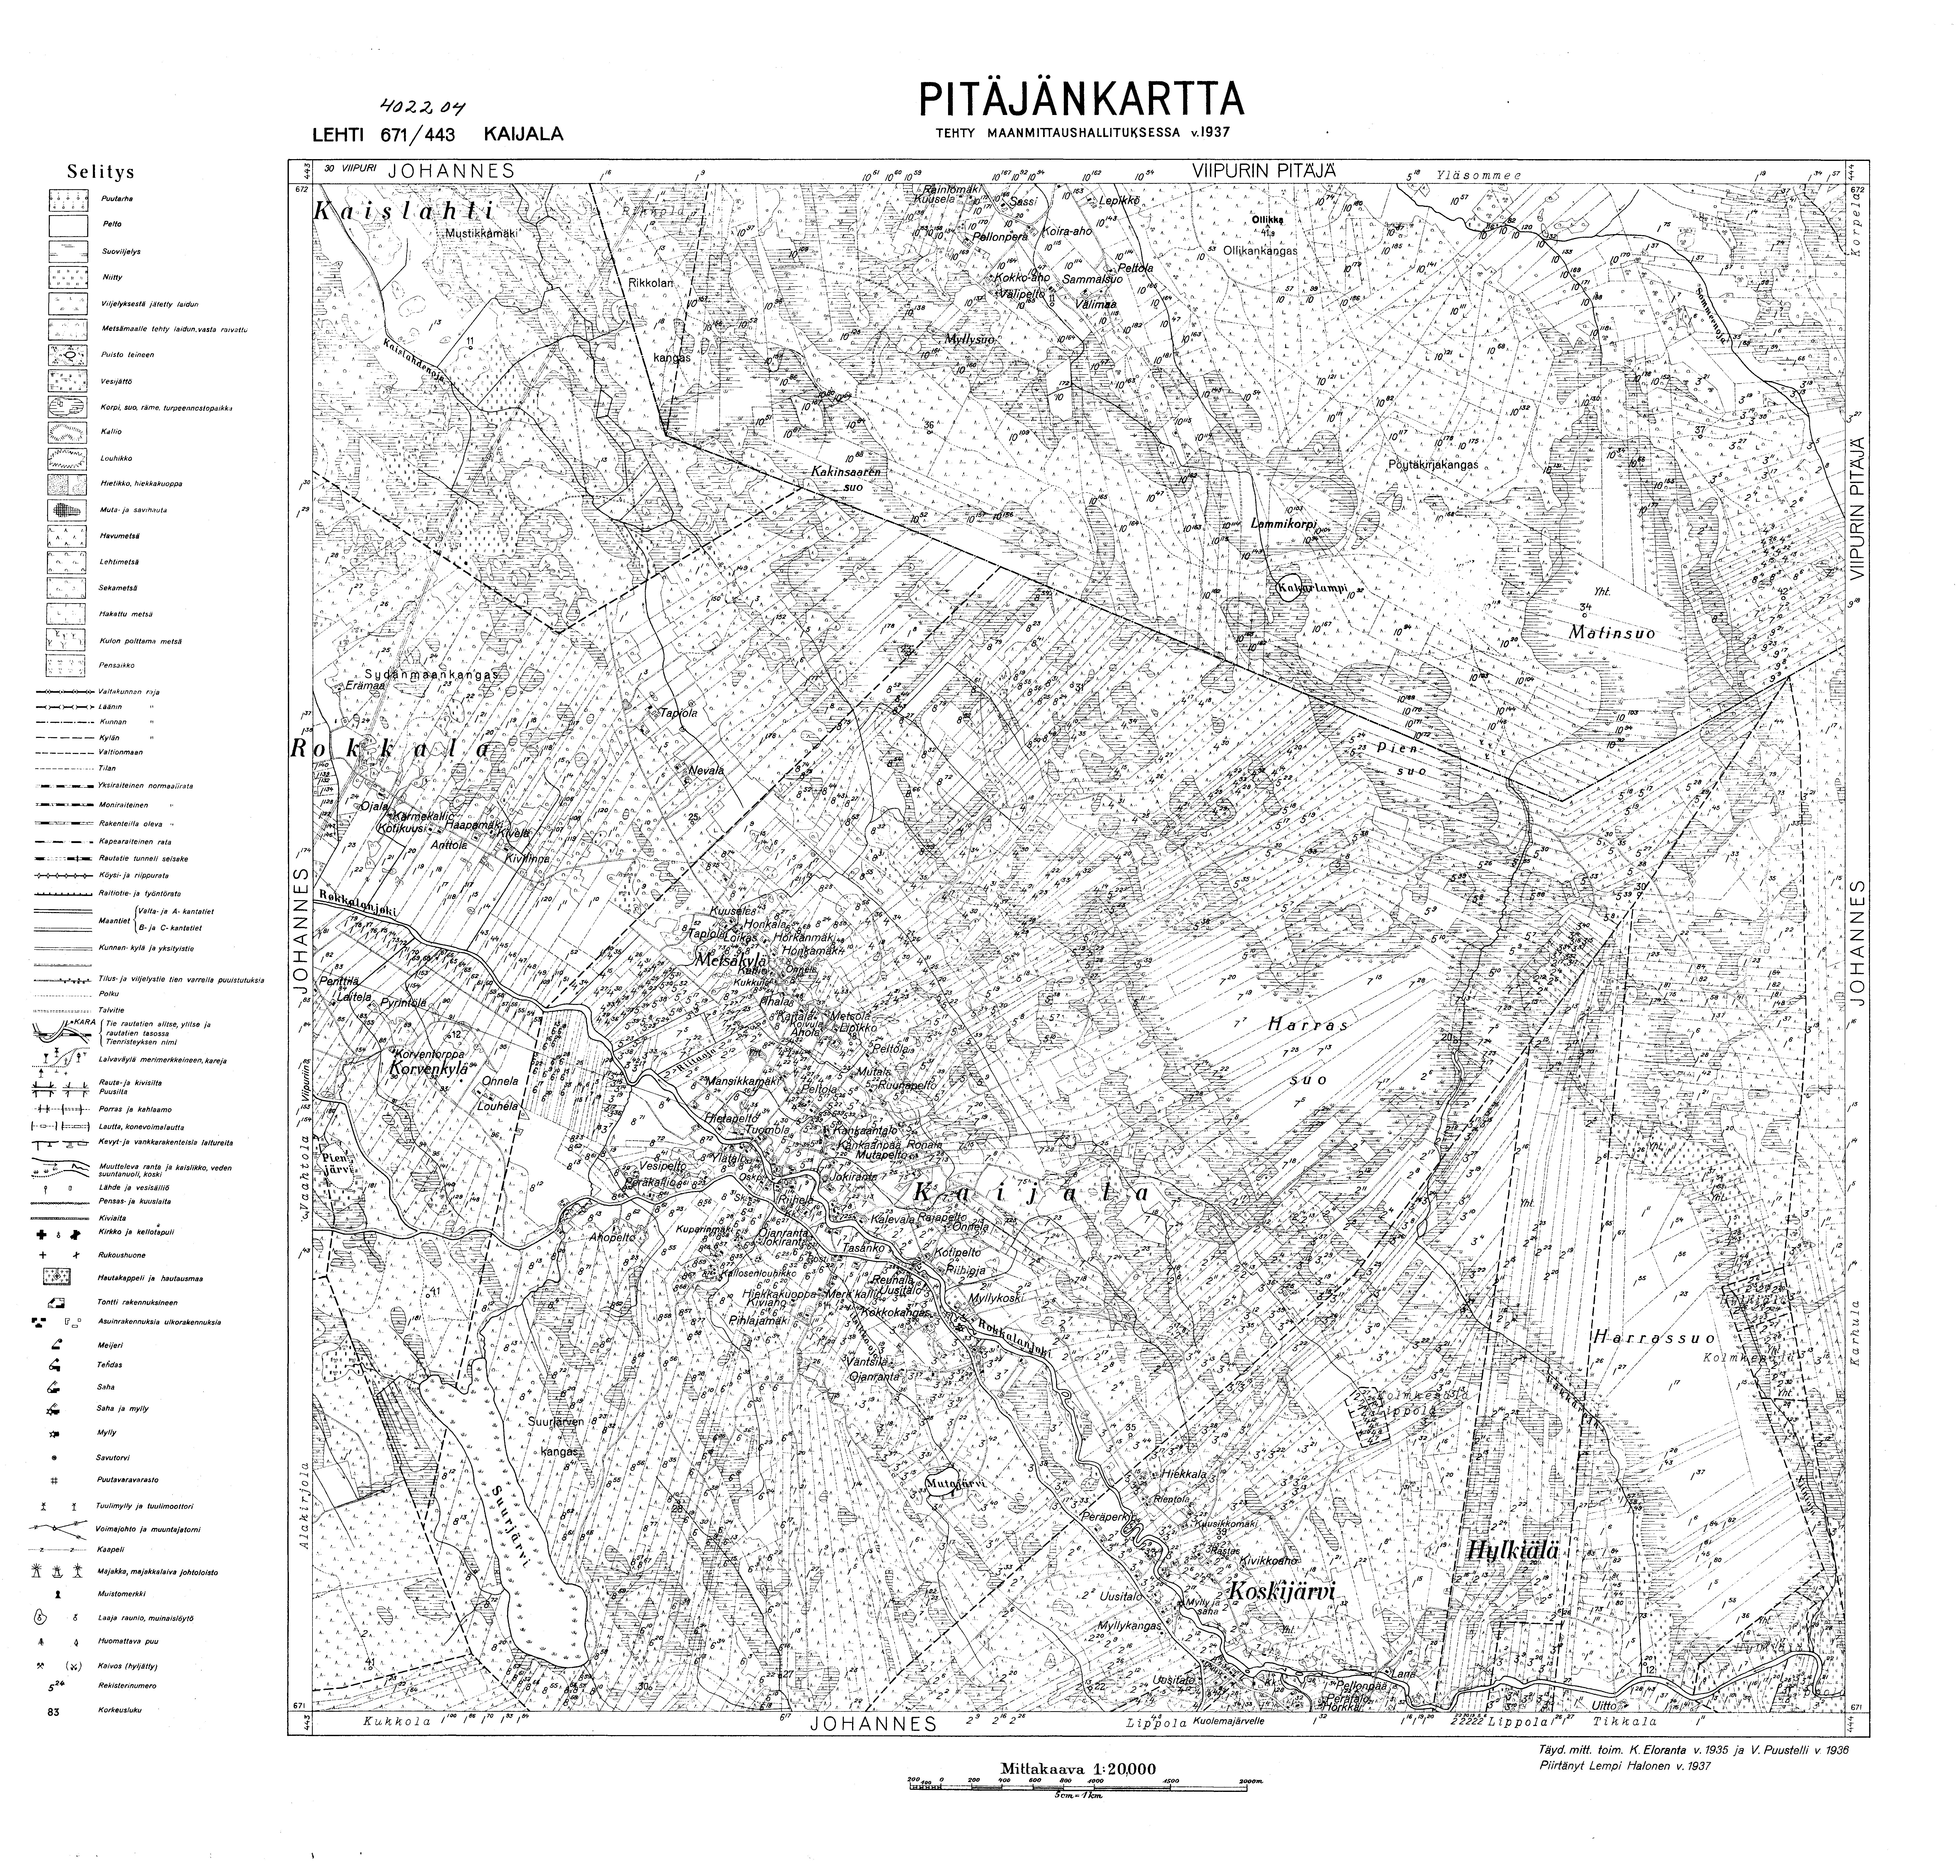 Tokarevo. Kaijala. Pitäjänkartta 402204. Parish map from 1937. Use the zooming tool to explore in higher level of detail. Obtain as a quality print or high resolution image